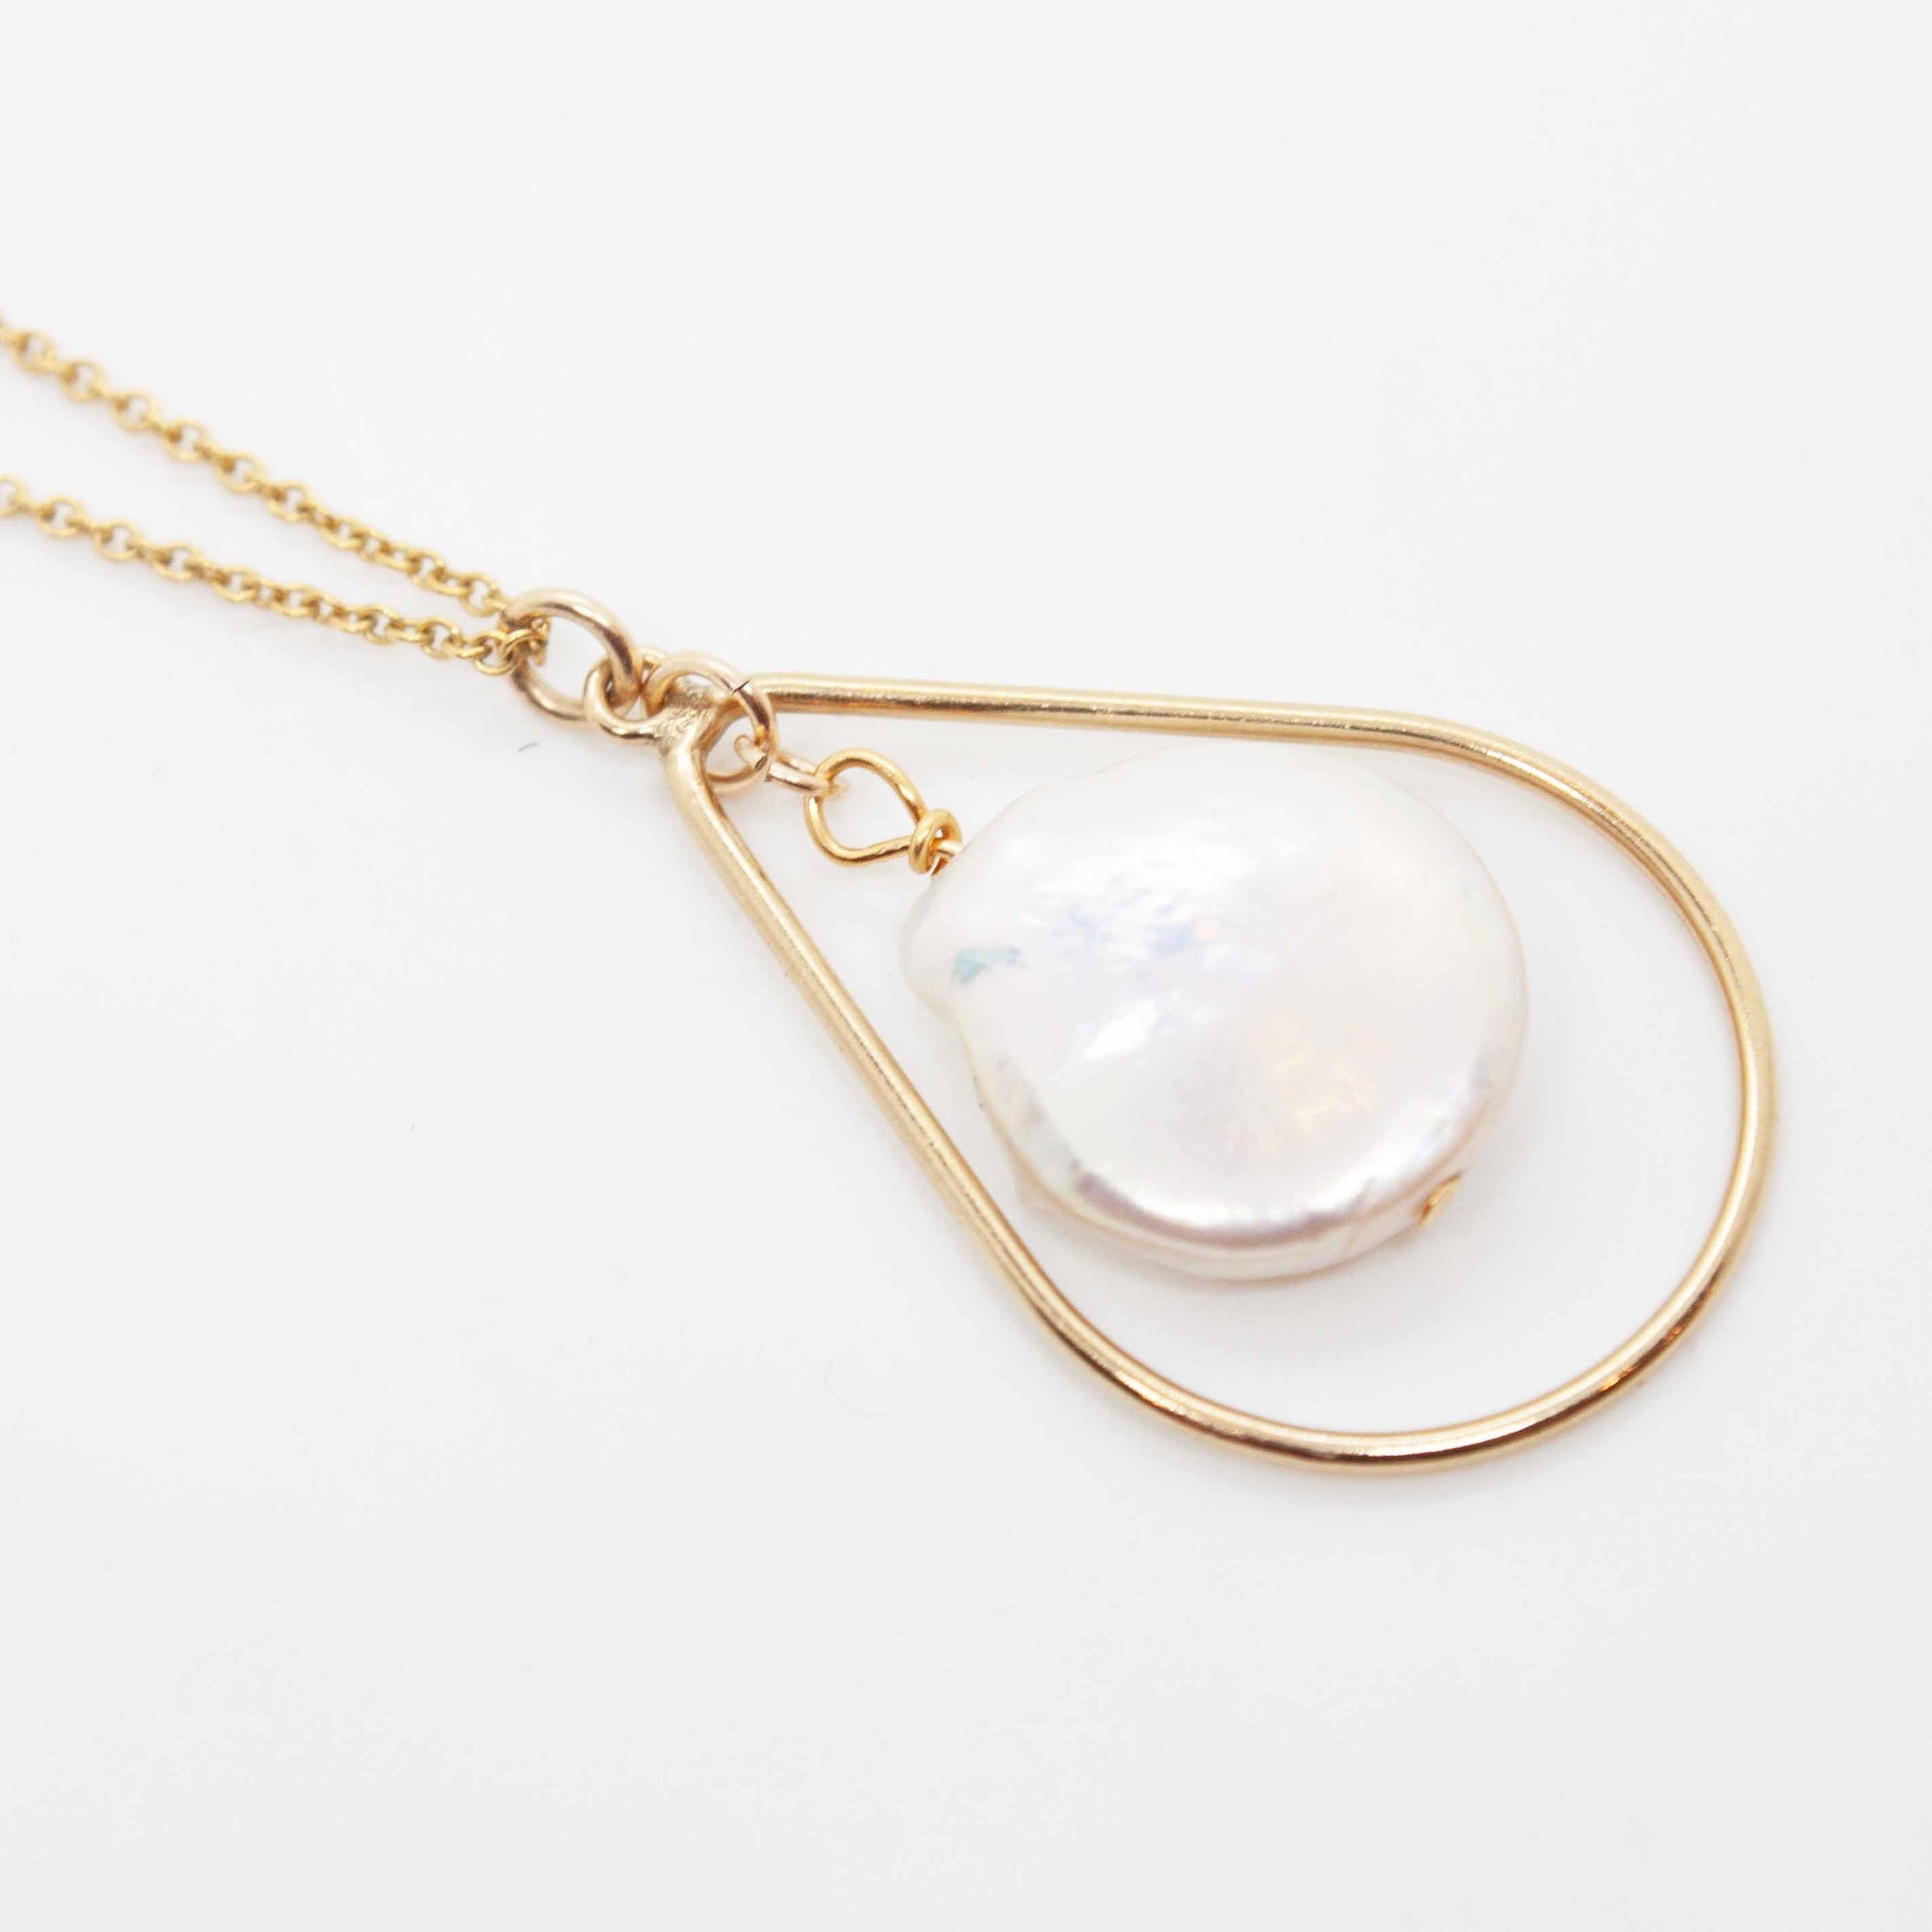 Designed with inspiration from a fellow fearless female, Lisa's necklace offers a modern shape with a classic pearl to freshen up your everyday! 16, 18 or 20 inch gold filled necklace with 1 1/4 inch gold filled teardrop pendant and keshi pearl. Handmade in Toronto by kp jewelry co.